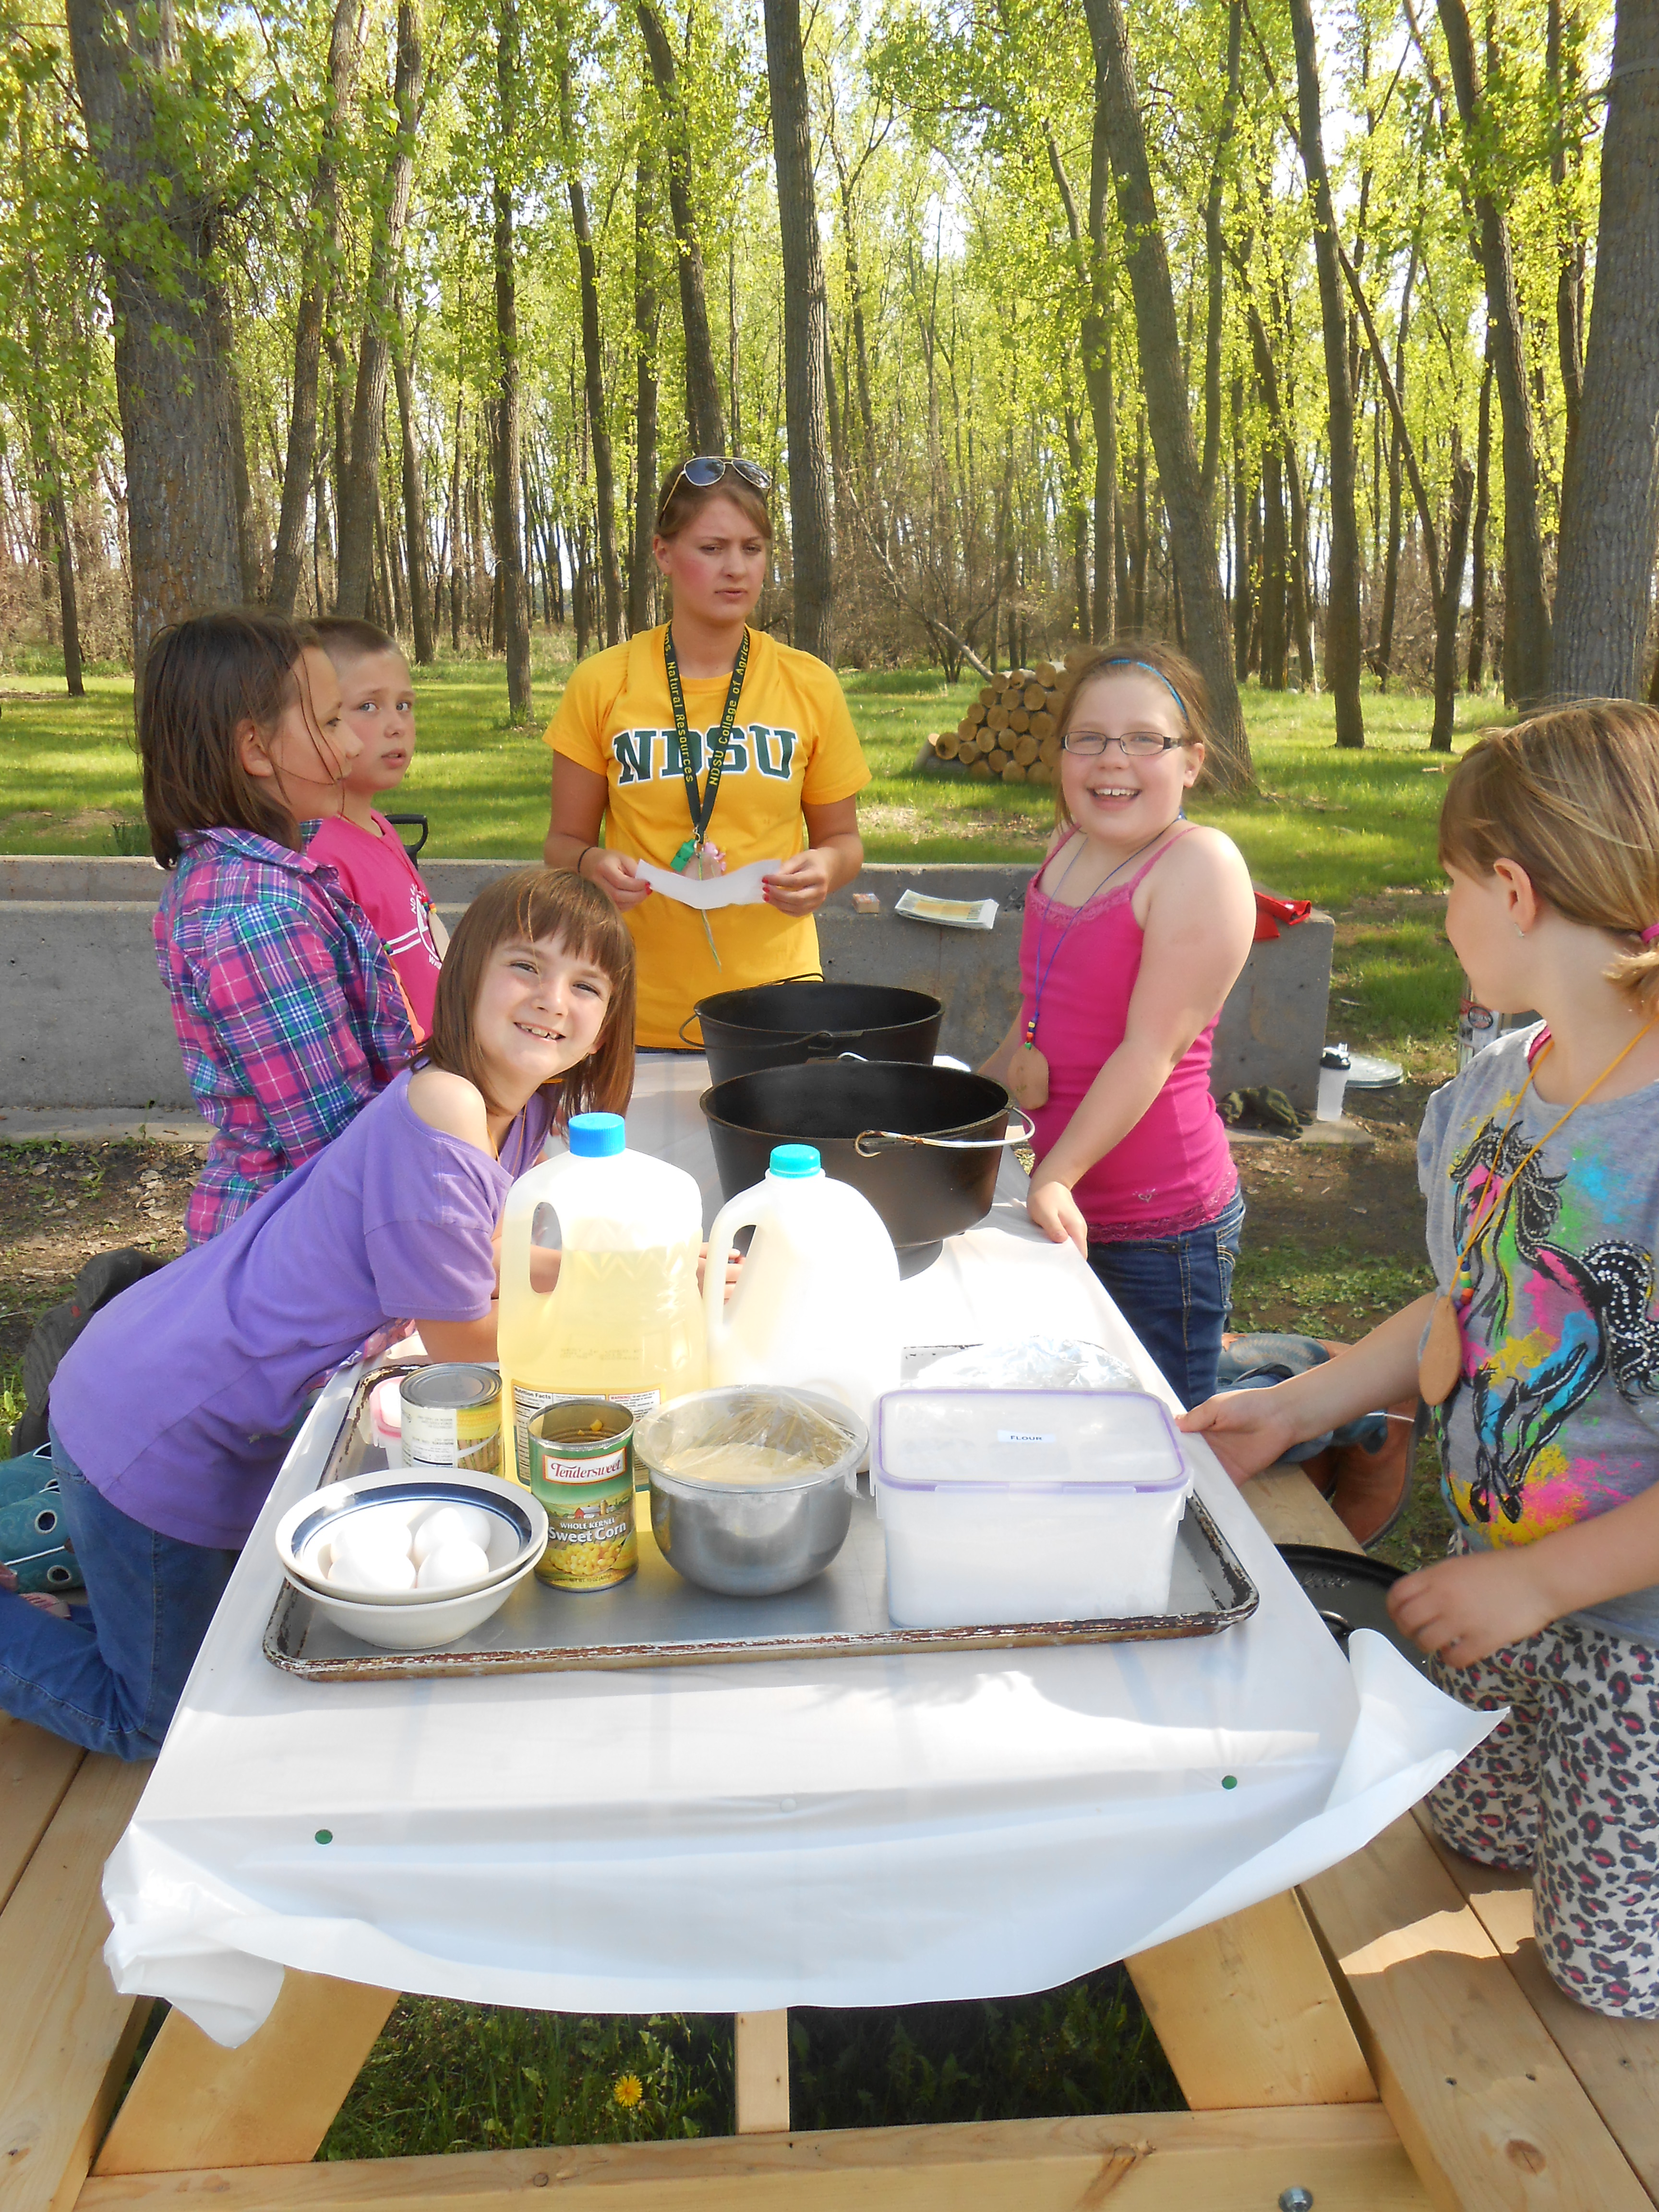 Youth receive a lesson in outdoor cooking at the North Dakota 4-H Camp near Washburn. (NDSU photo)